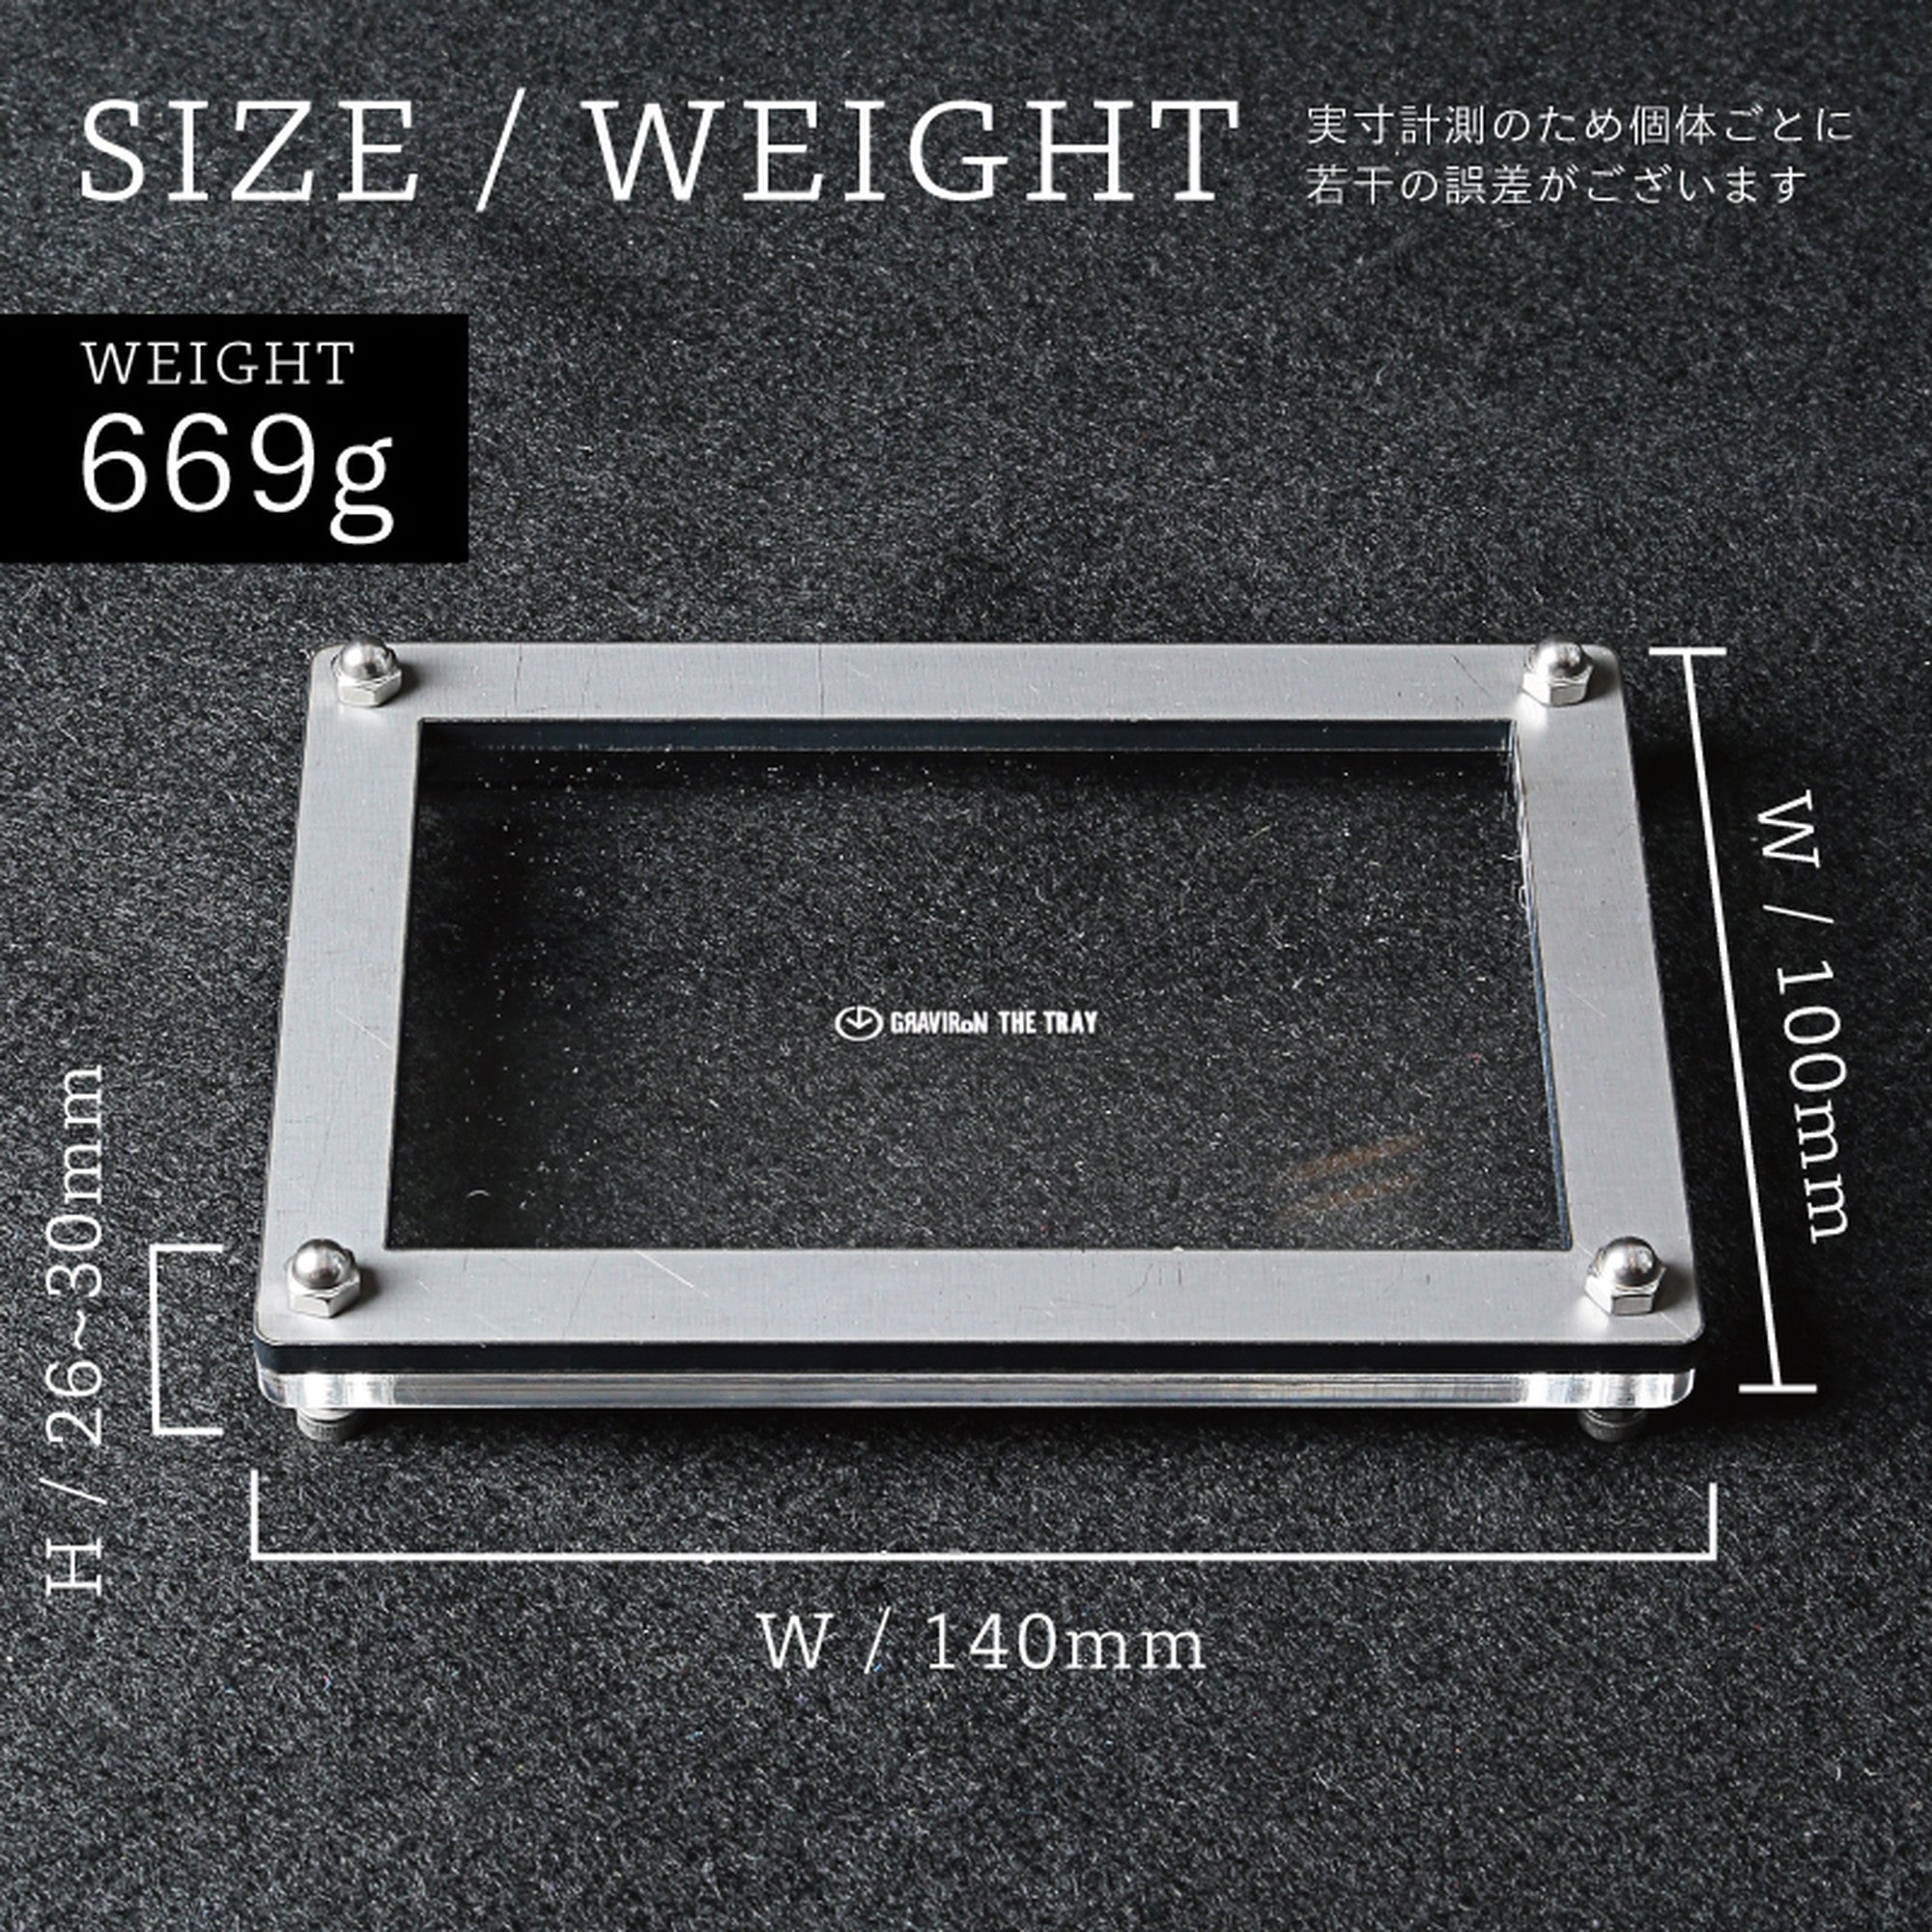 Joint Series Tray　BOTTOM：アクリル　TOP：黒皮鉄